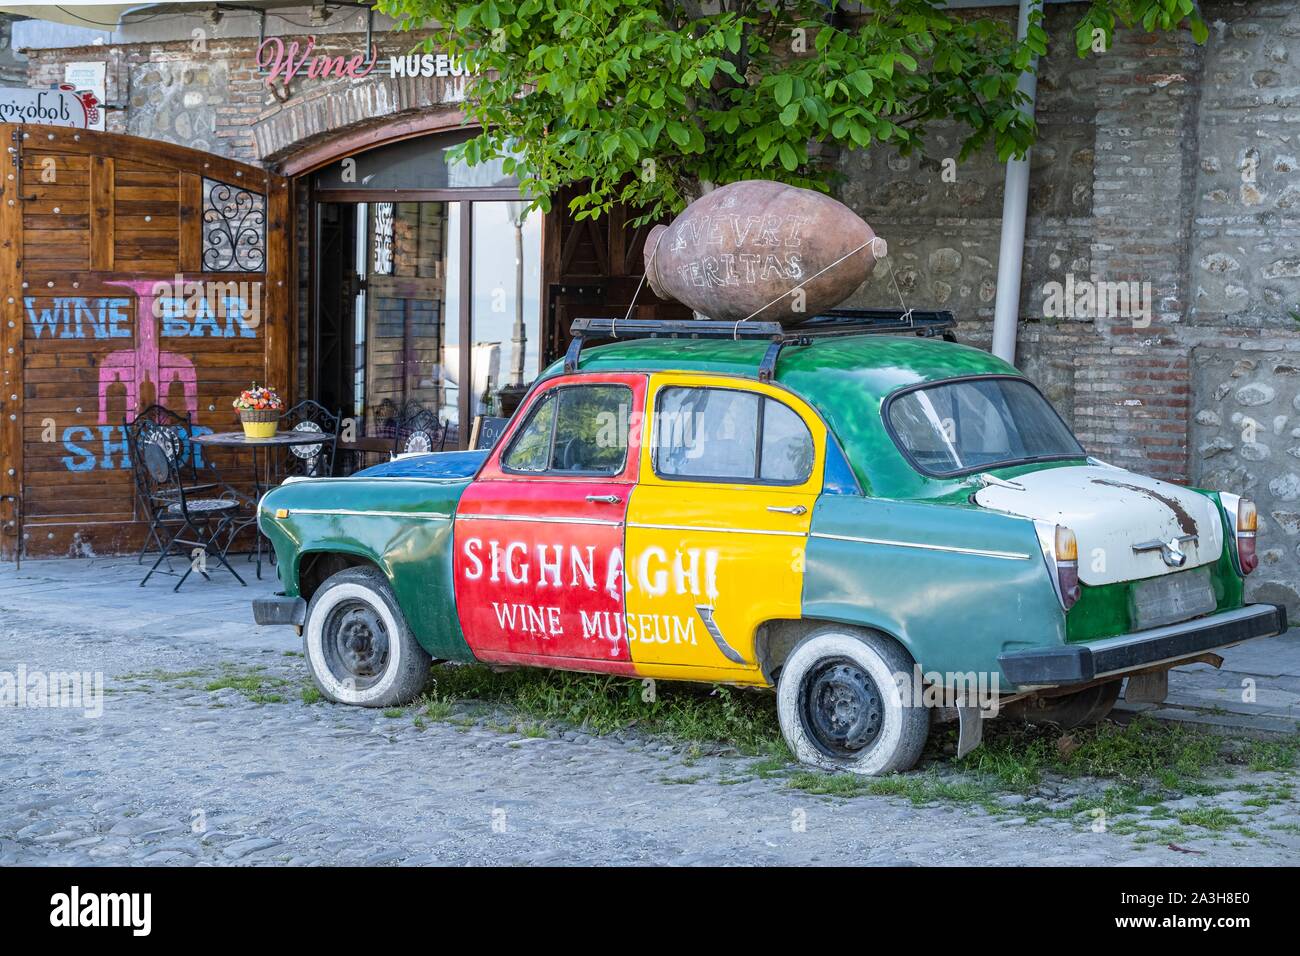 Georgia, Kakheti region, Sighnaghi fortified village, advertising for the Wine Museum on a vintage Soviet car Stock Photo